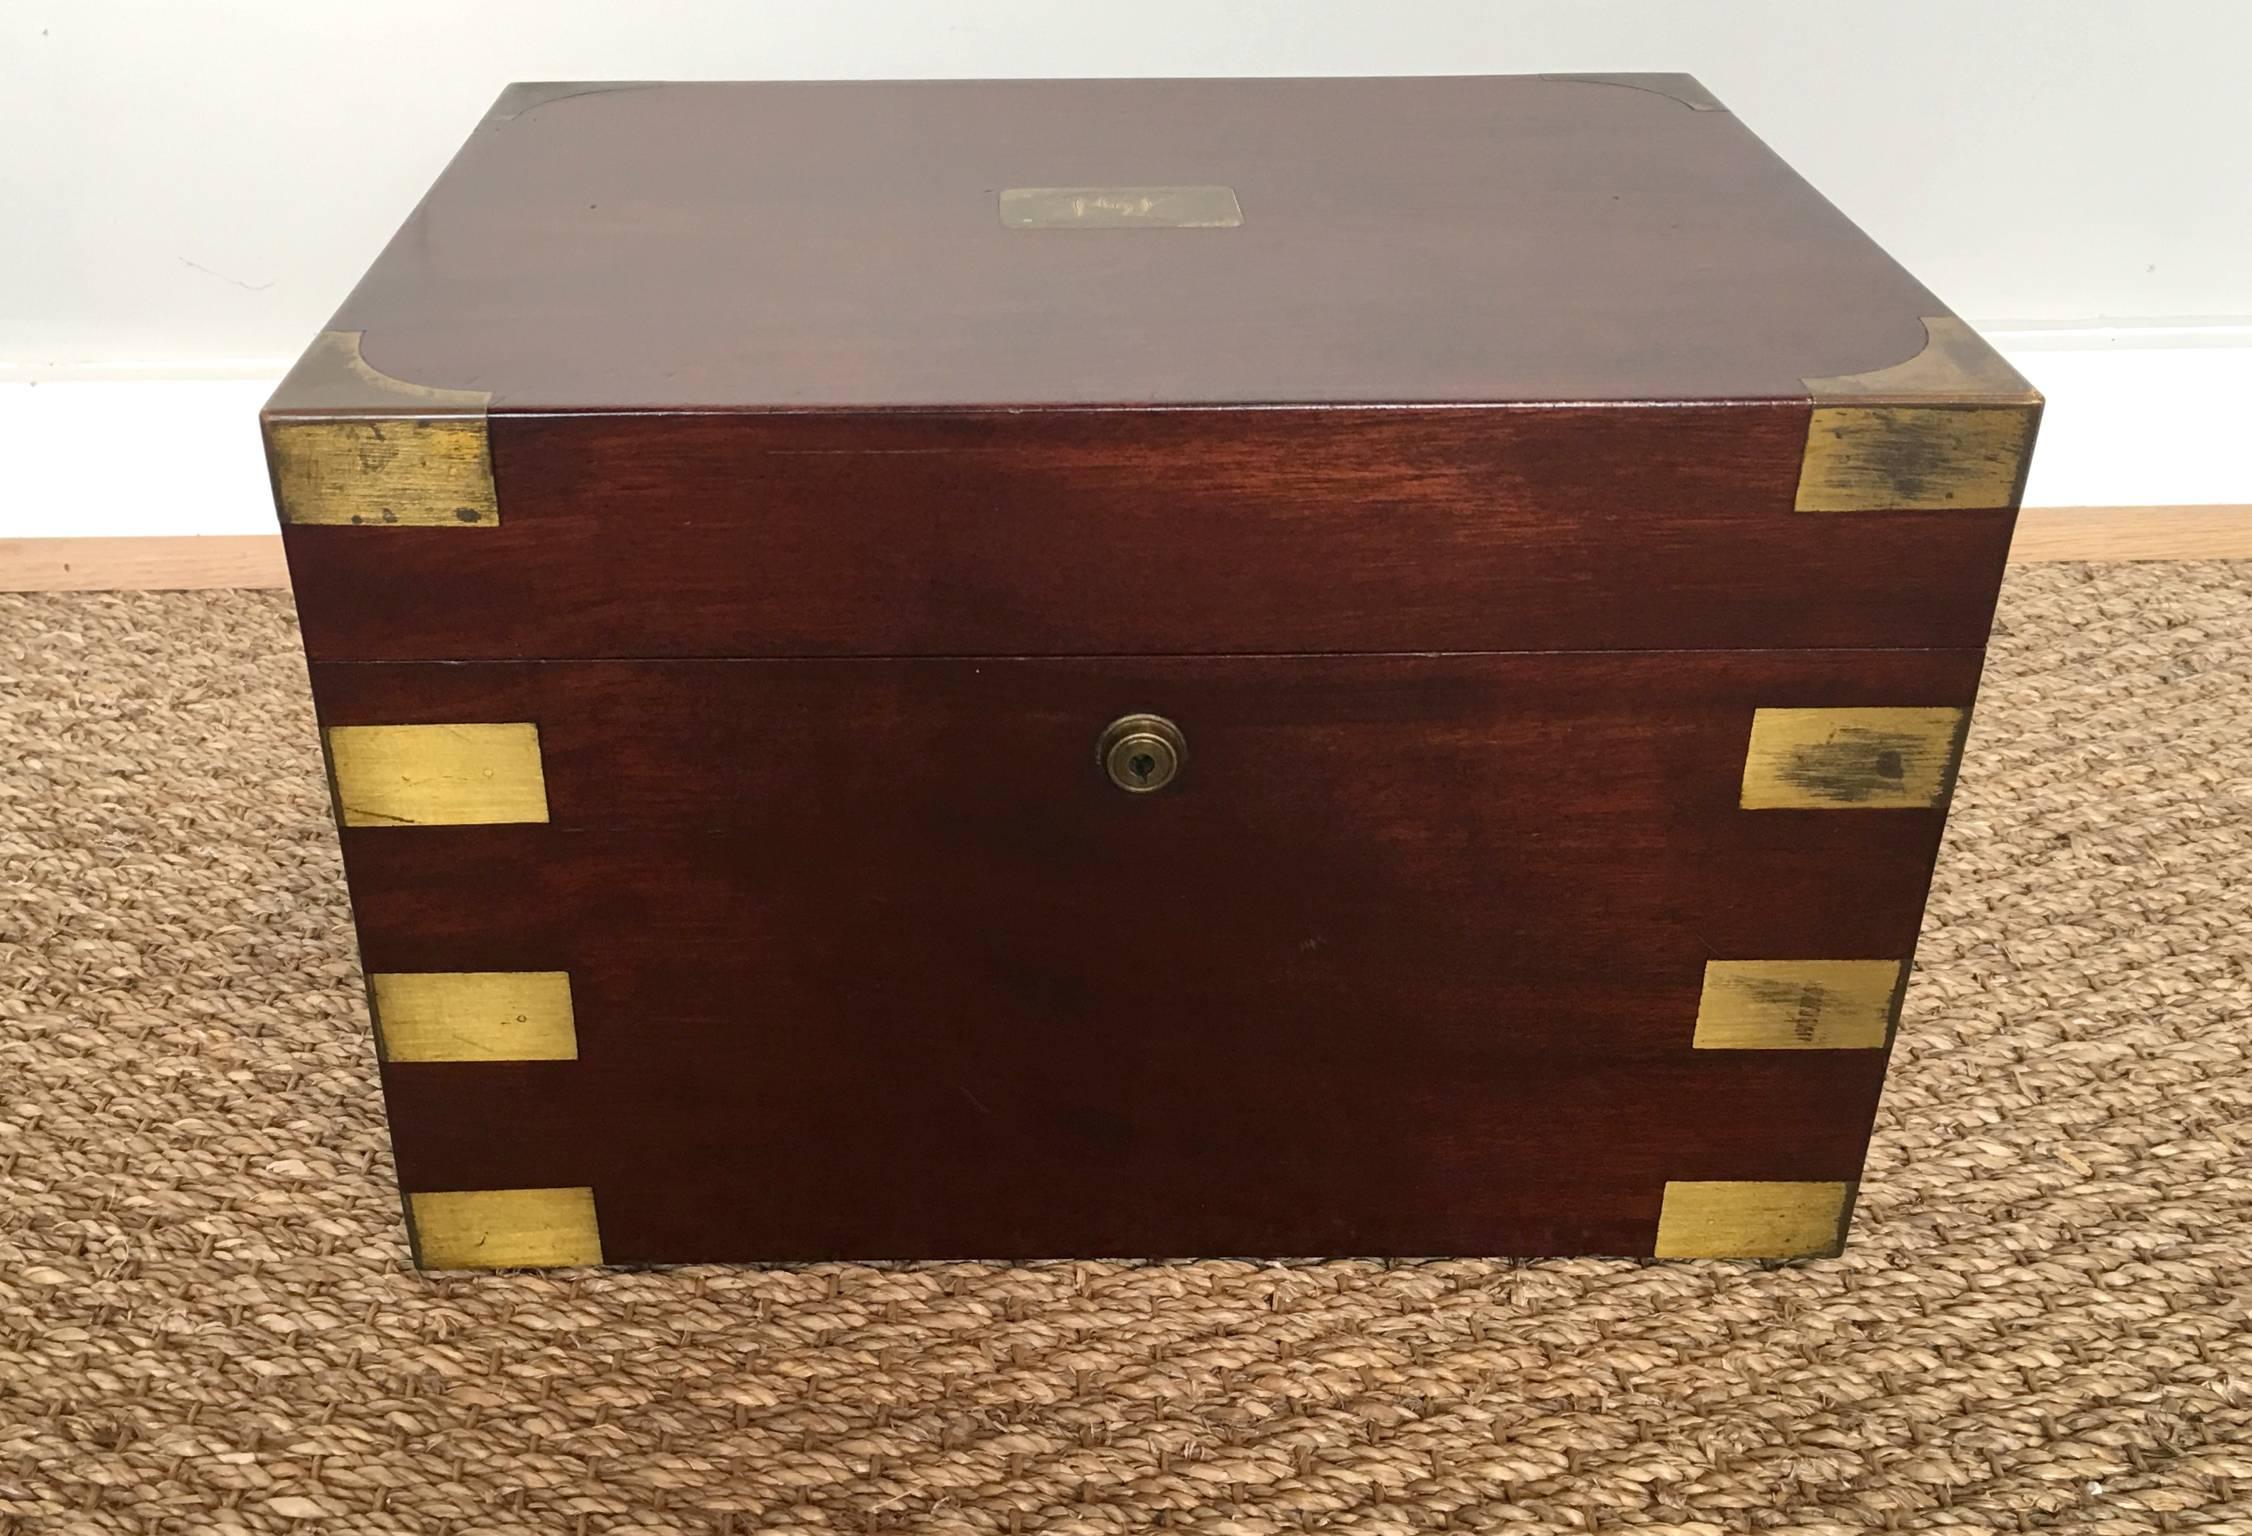 A large English mahogany and brass humidor by Benson & Hedges dating from the early 20th century.